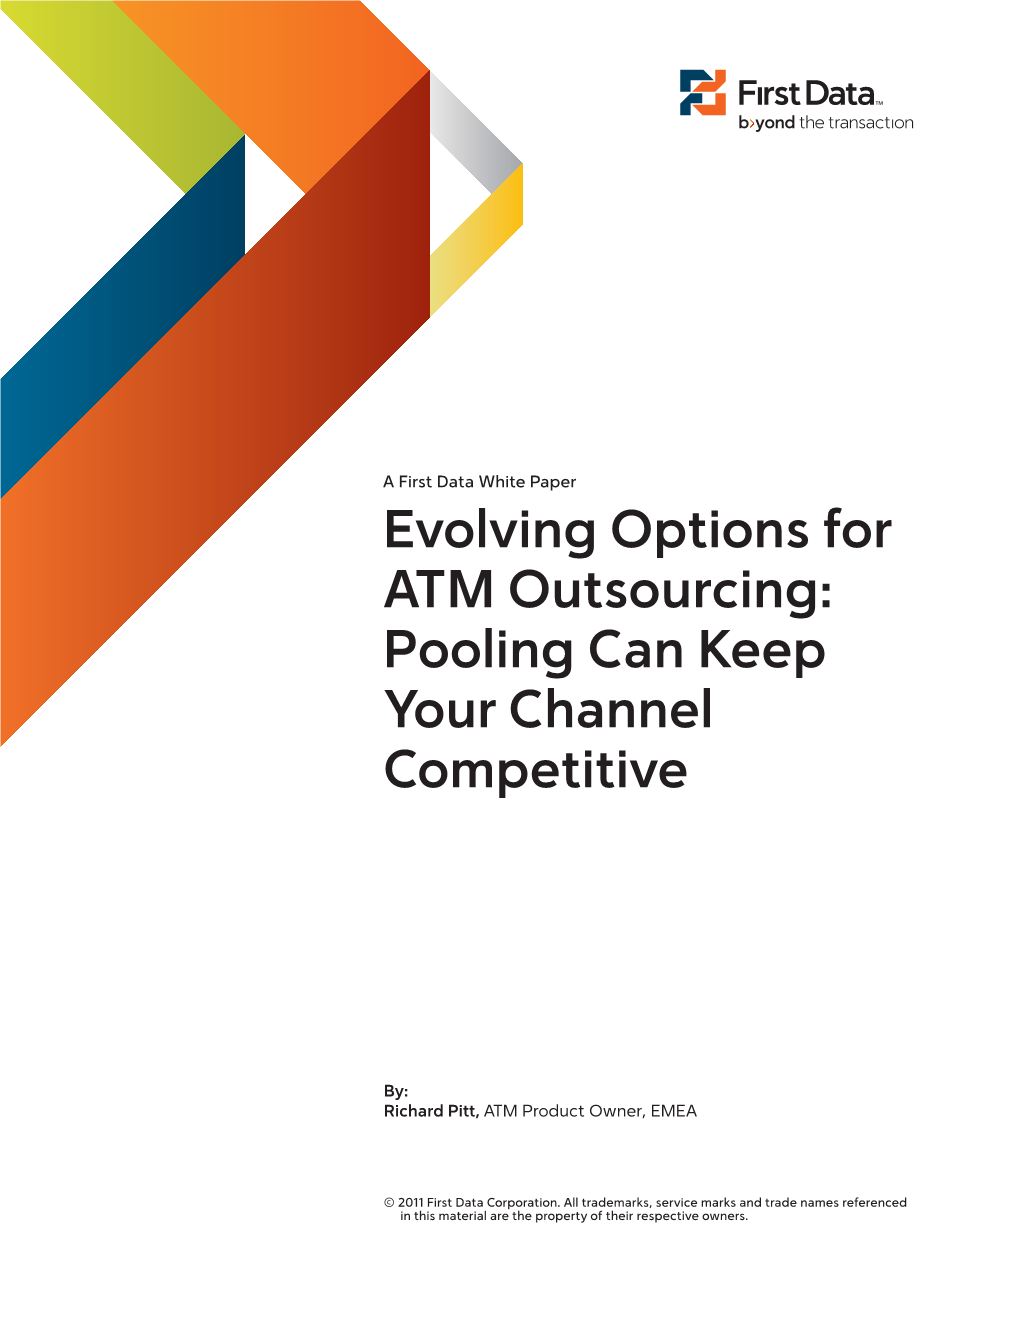 Evolving Options for ATM Outsourcing: Pooling Can Keep Your Channel Competitive